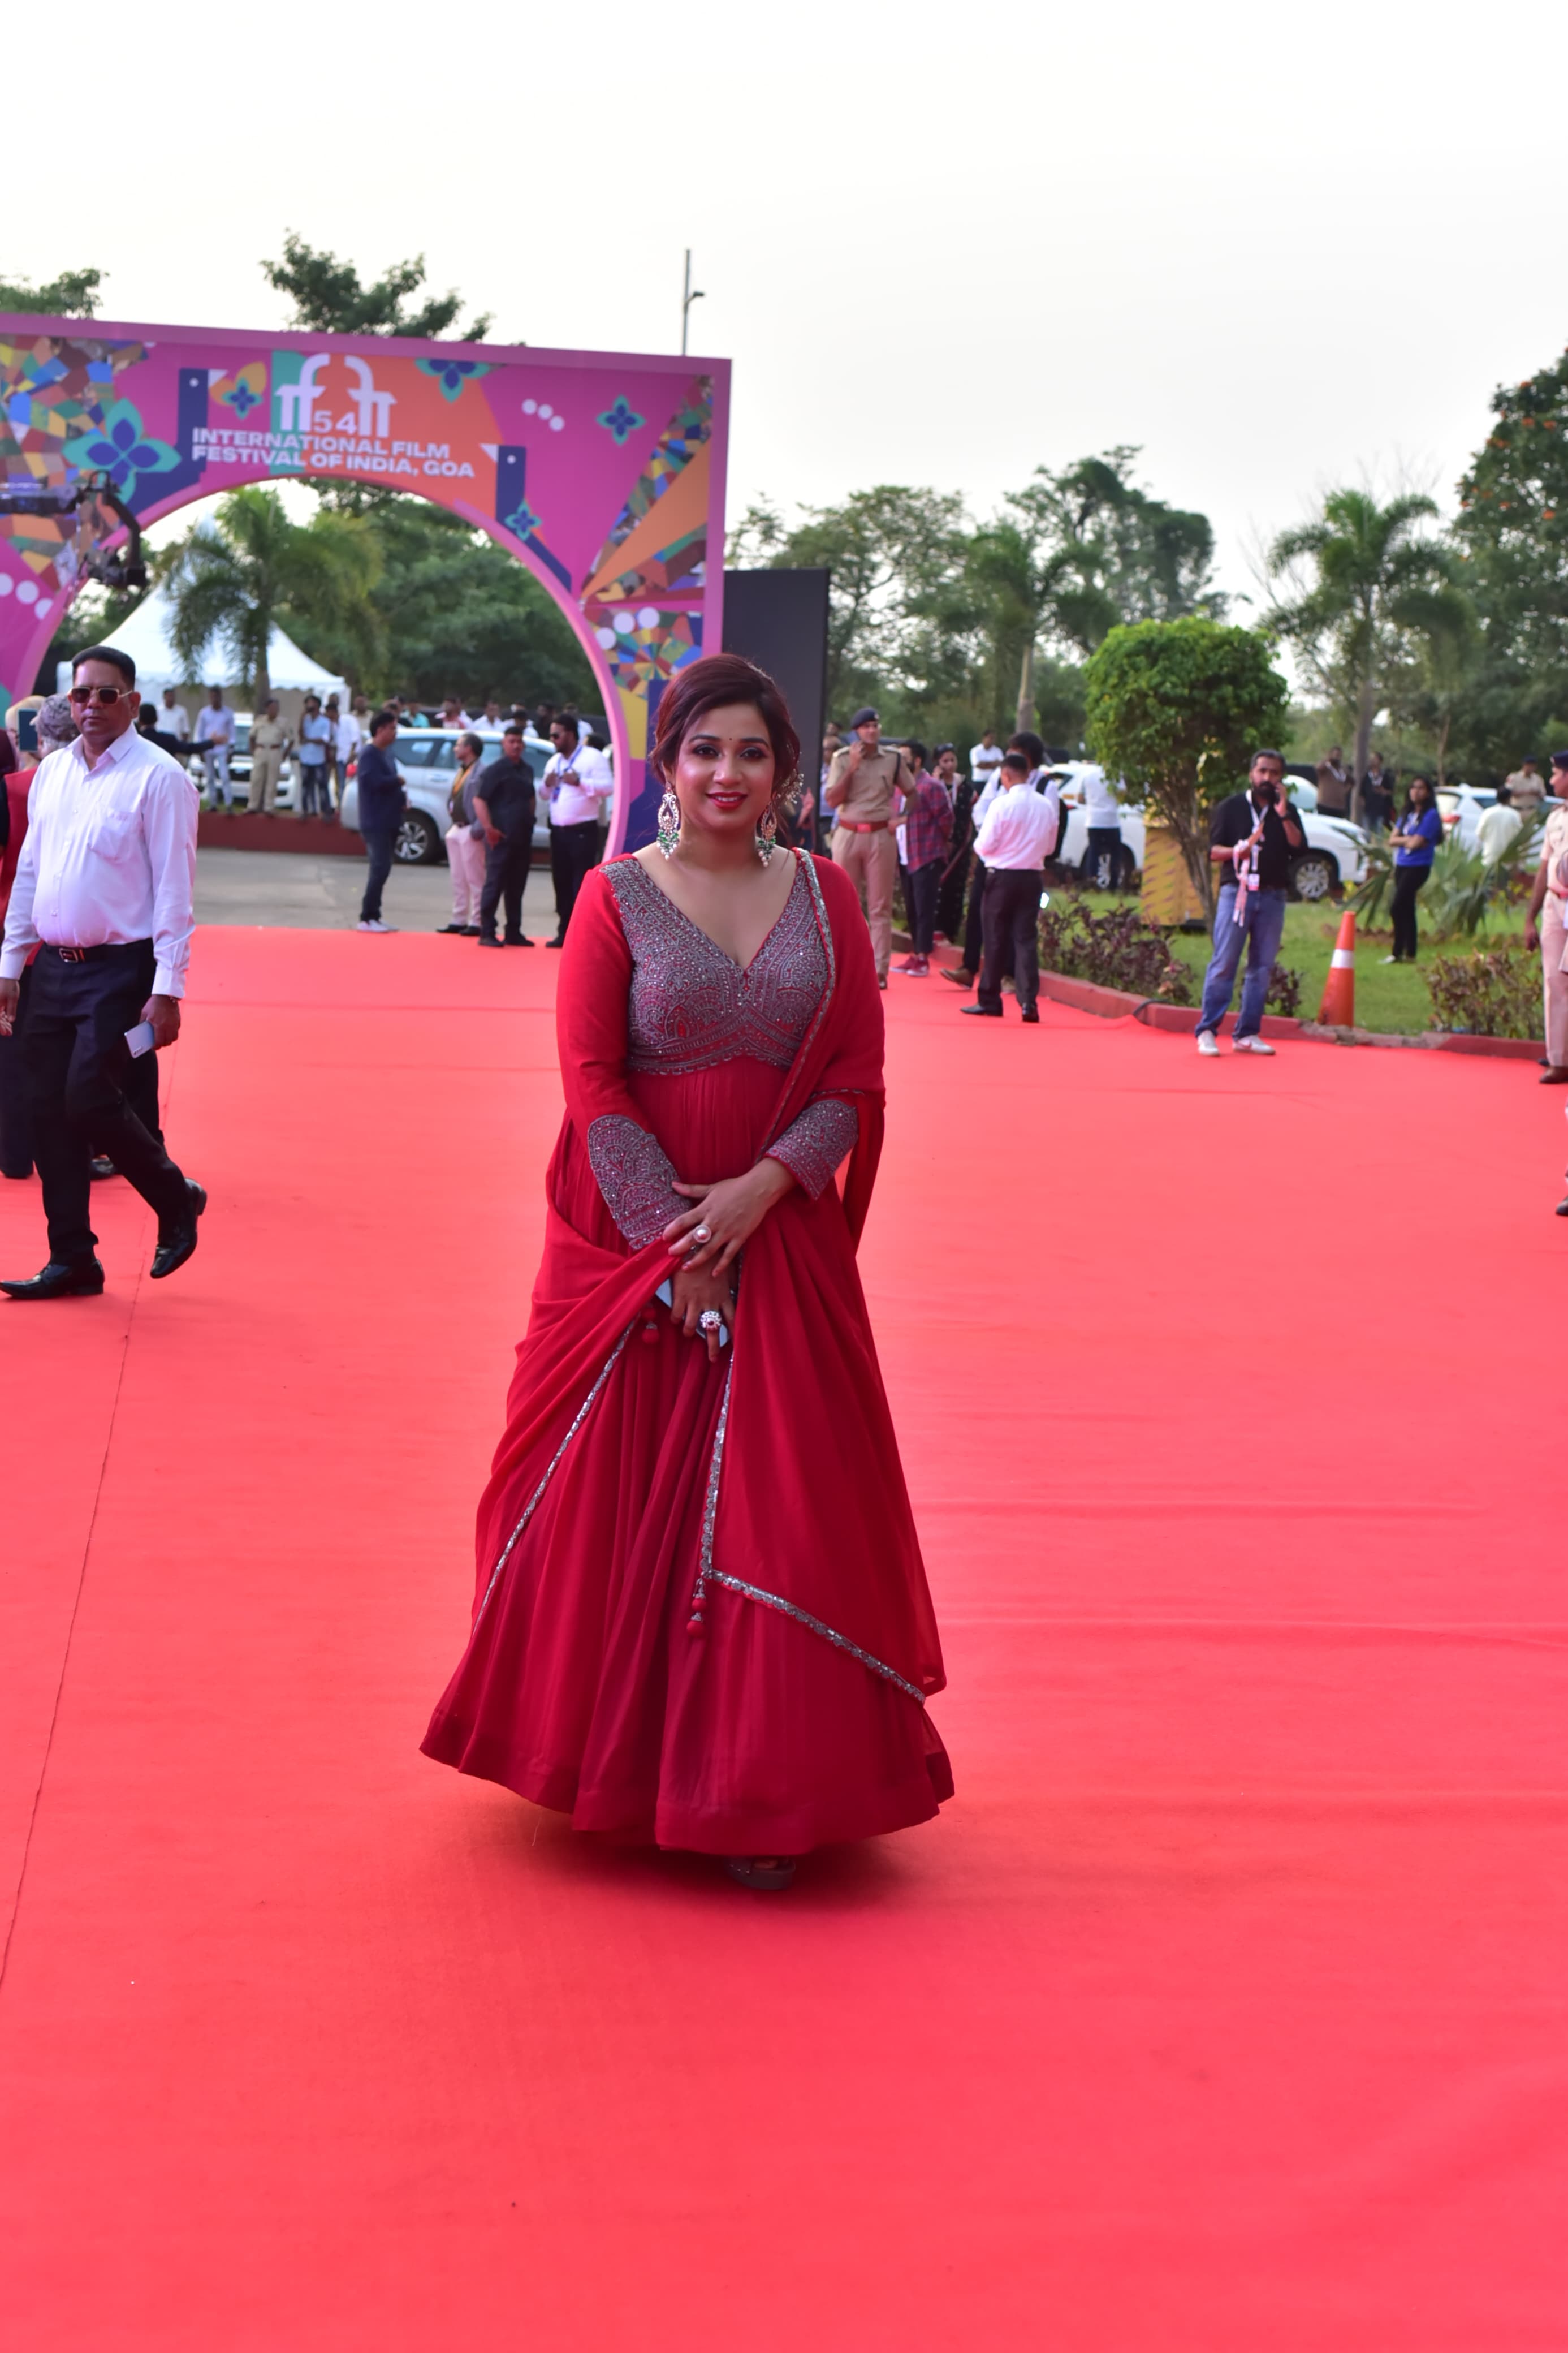 Shreya Ghoshal arrived looking like a vision in red. The singer exuded beauty and grace as she walked the red carpet